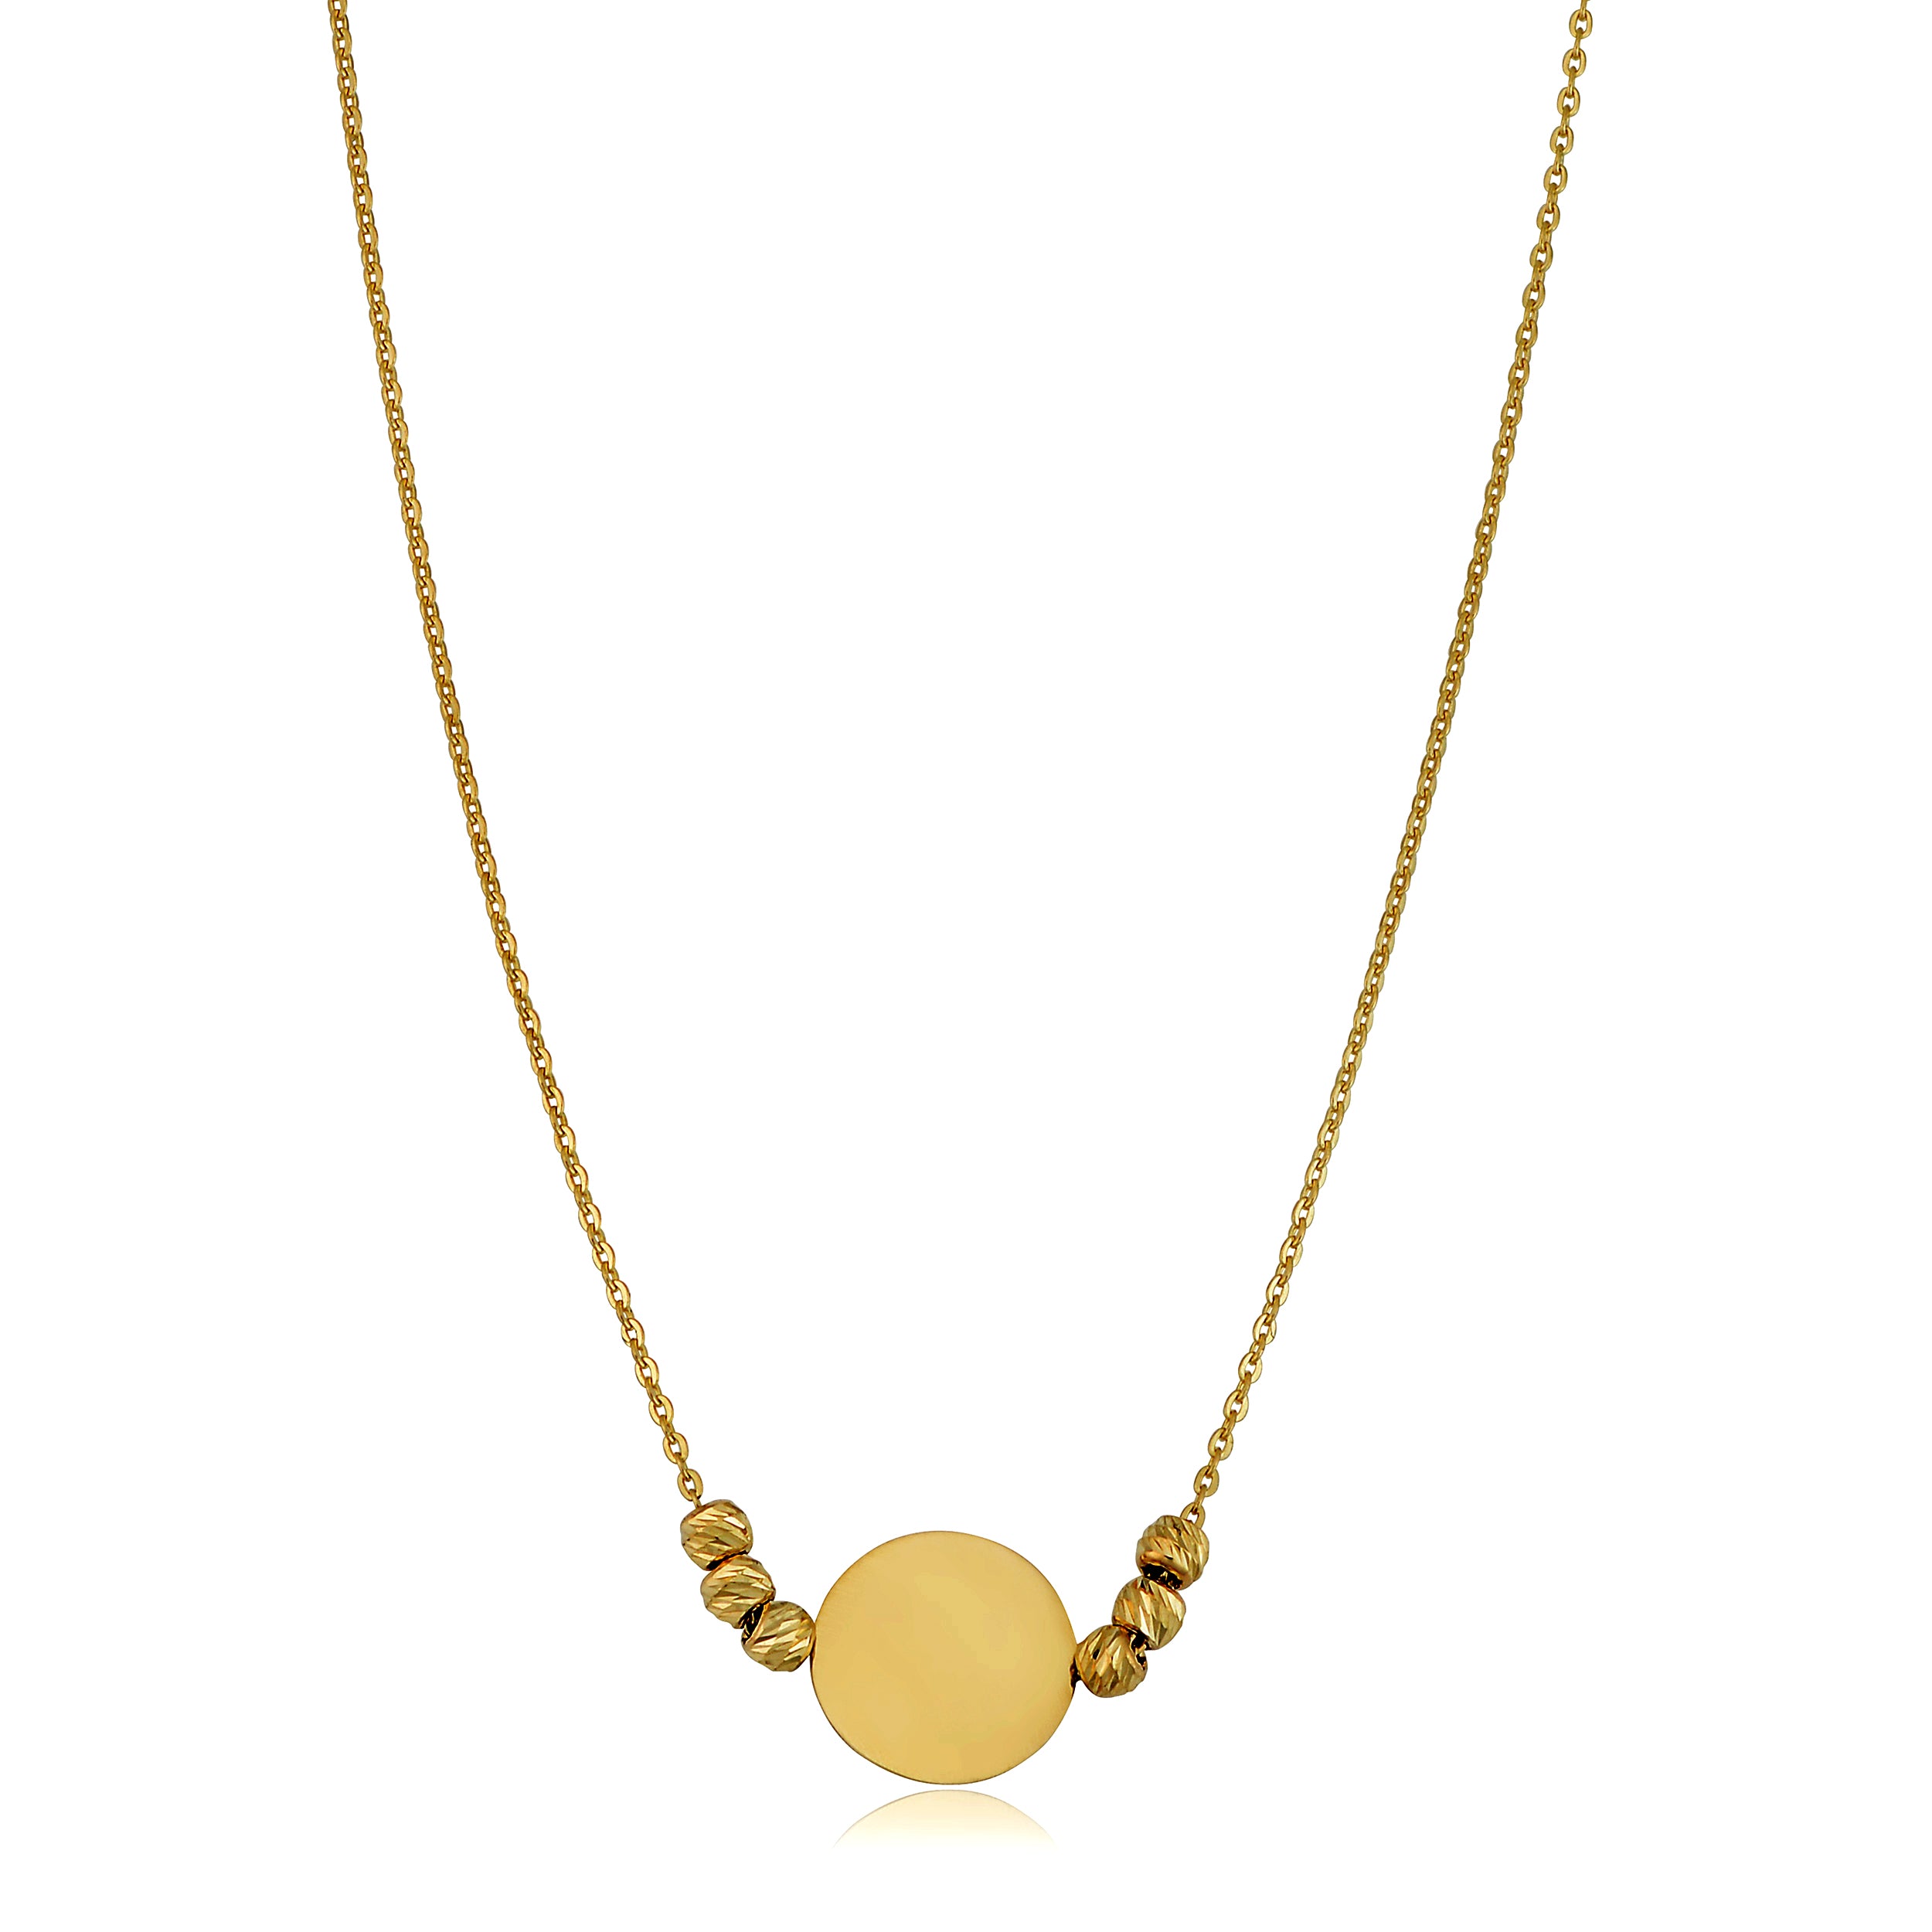 14K Yellow Gold Round Disc And Bead Necklace, 17" To 18" Adjustable fine designer jewelry for men and women